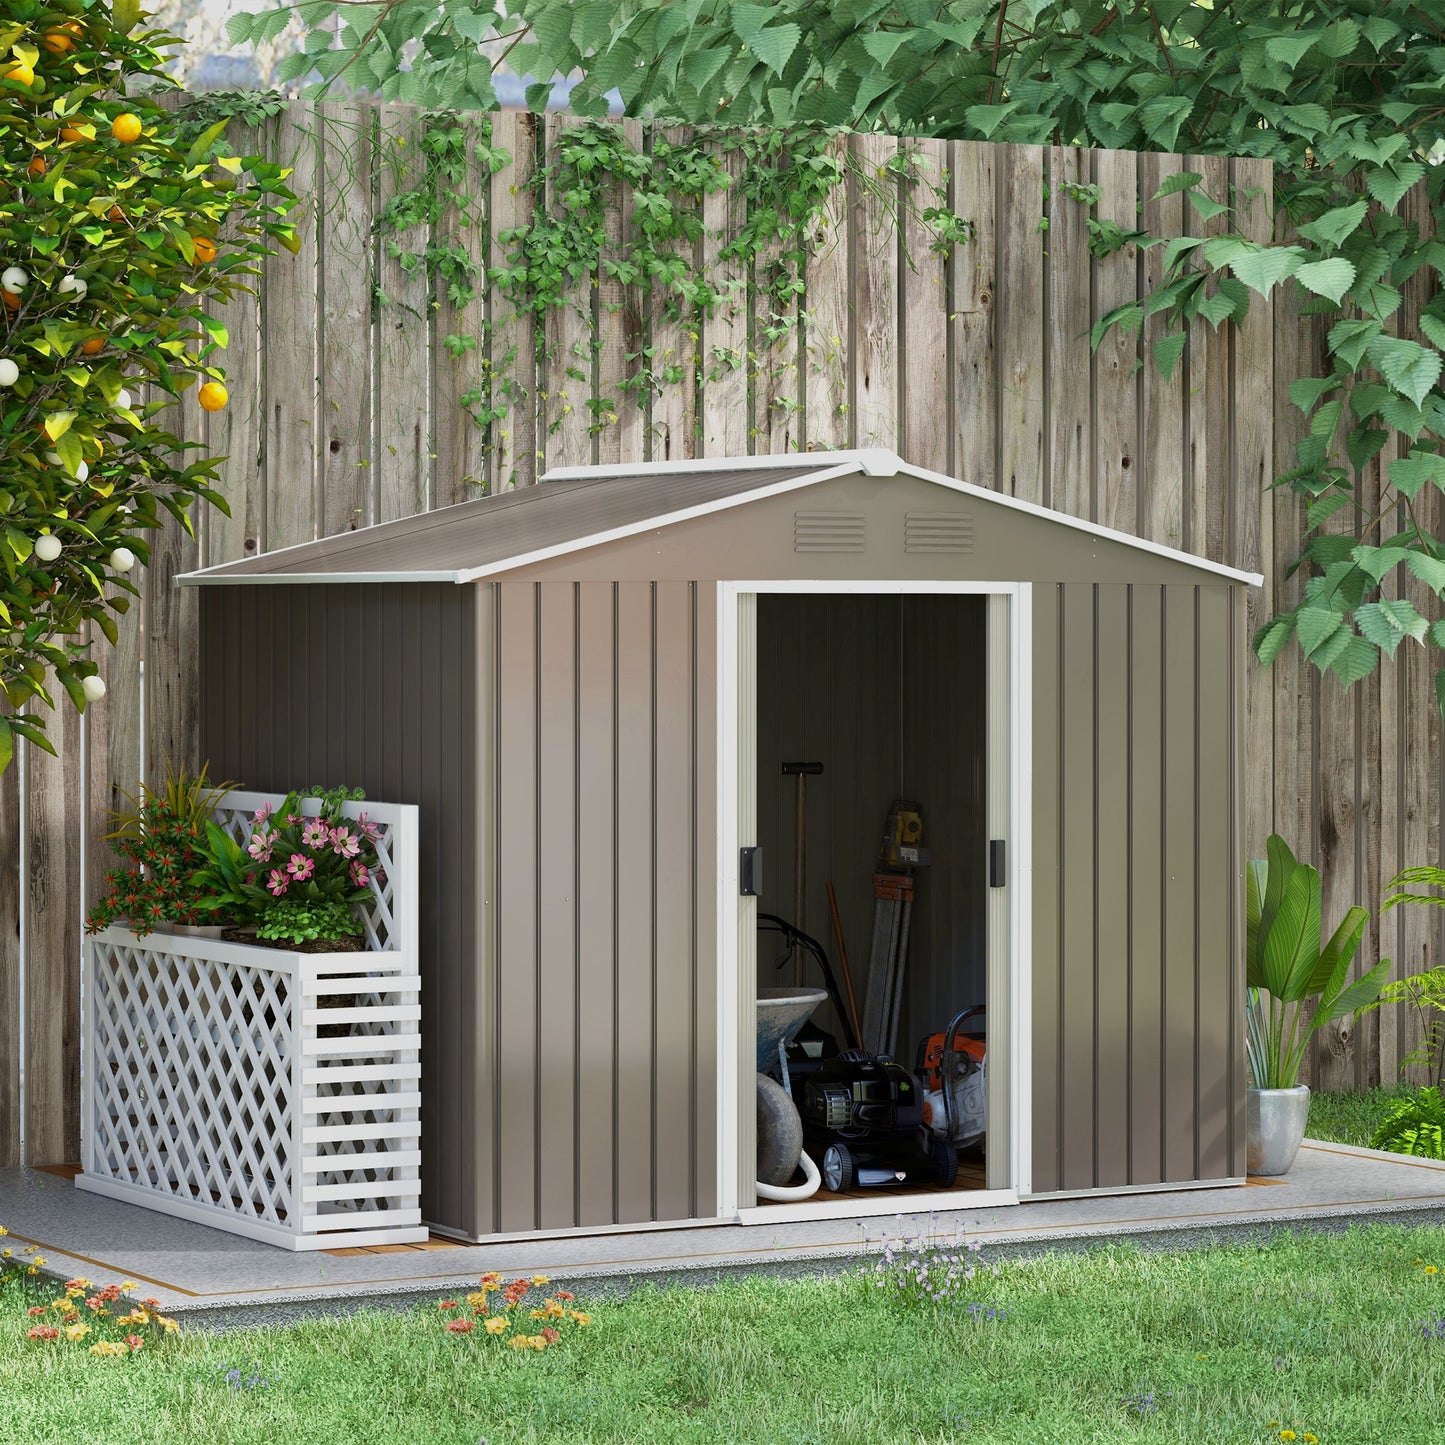 Outsunny 8 x 6ft Outdoor Garden Storage Shed, Metal Tool House with Ventilation and Sliding Doors, Light Grey